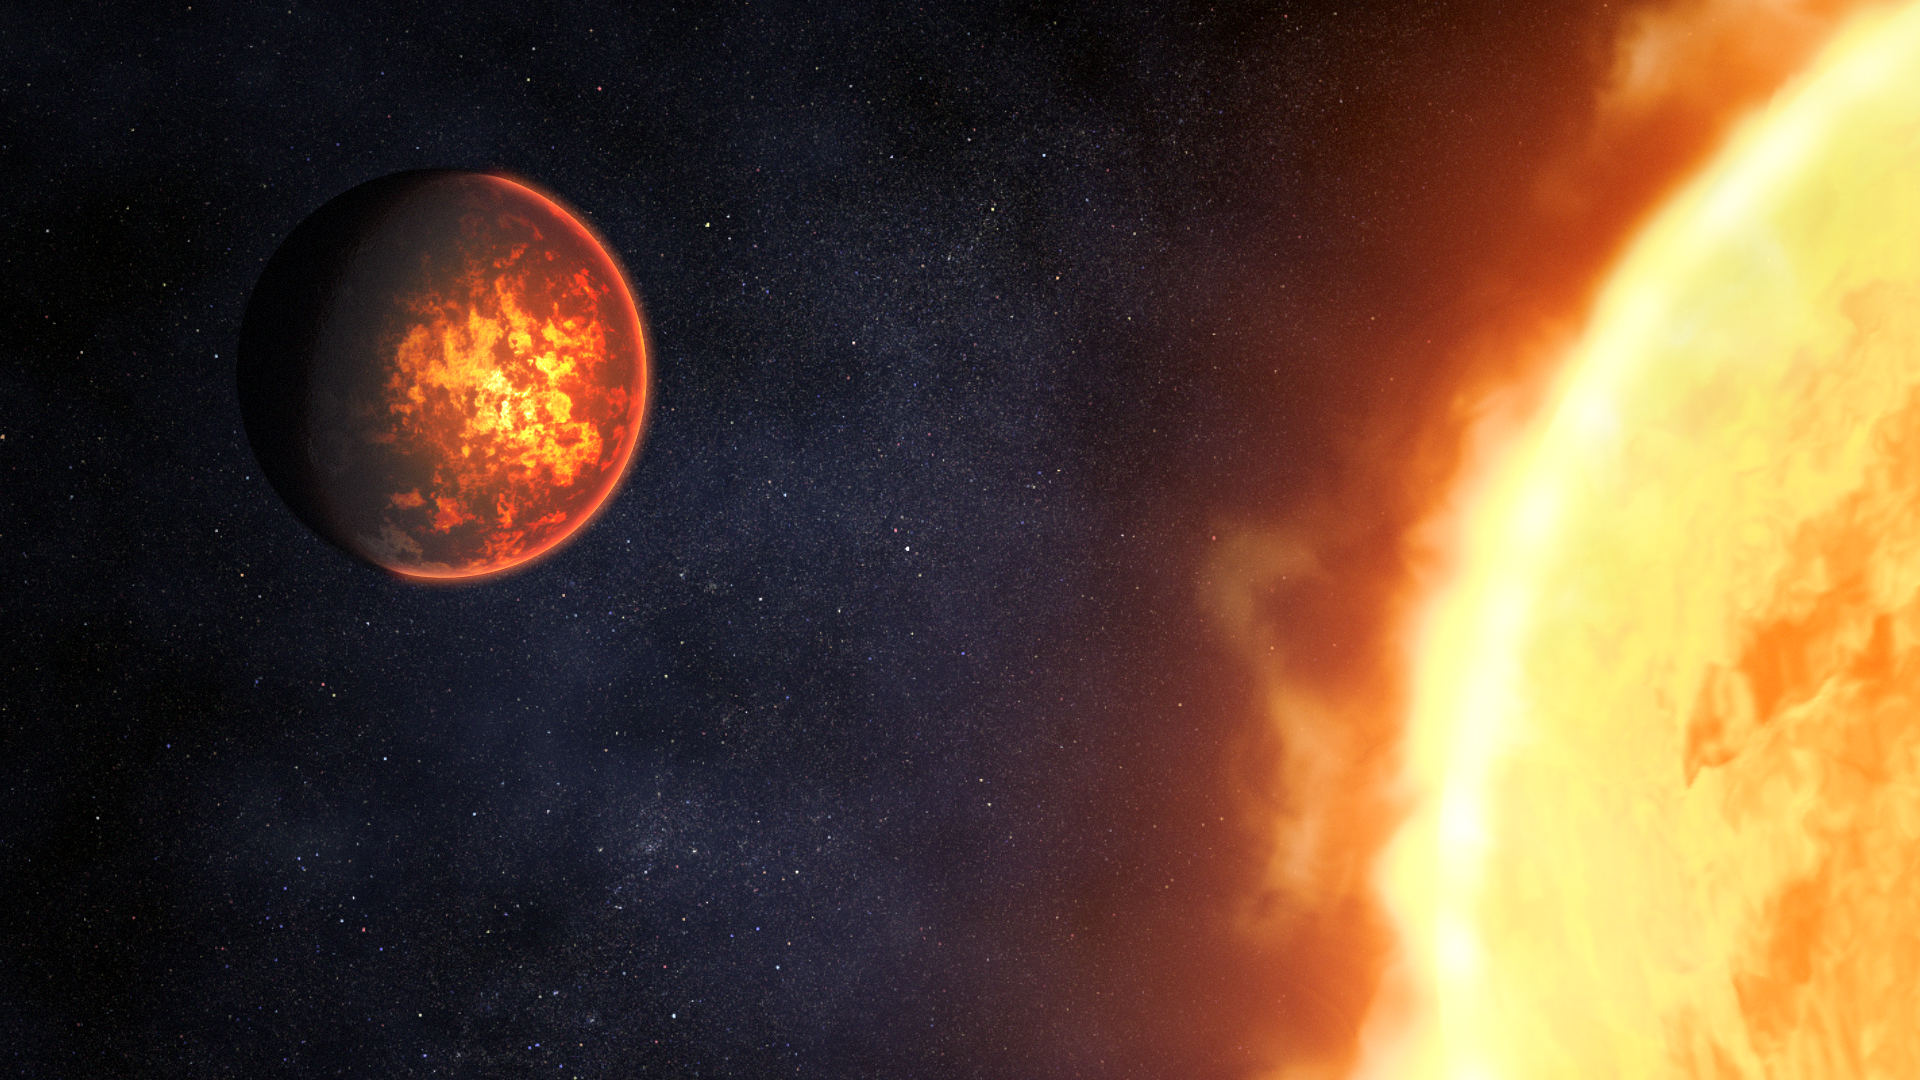 Illustration bright red flaming sunlike planet on the right only partially in the frame, and slightly glowing red planet on the left.